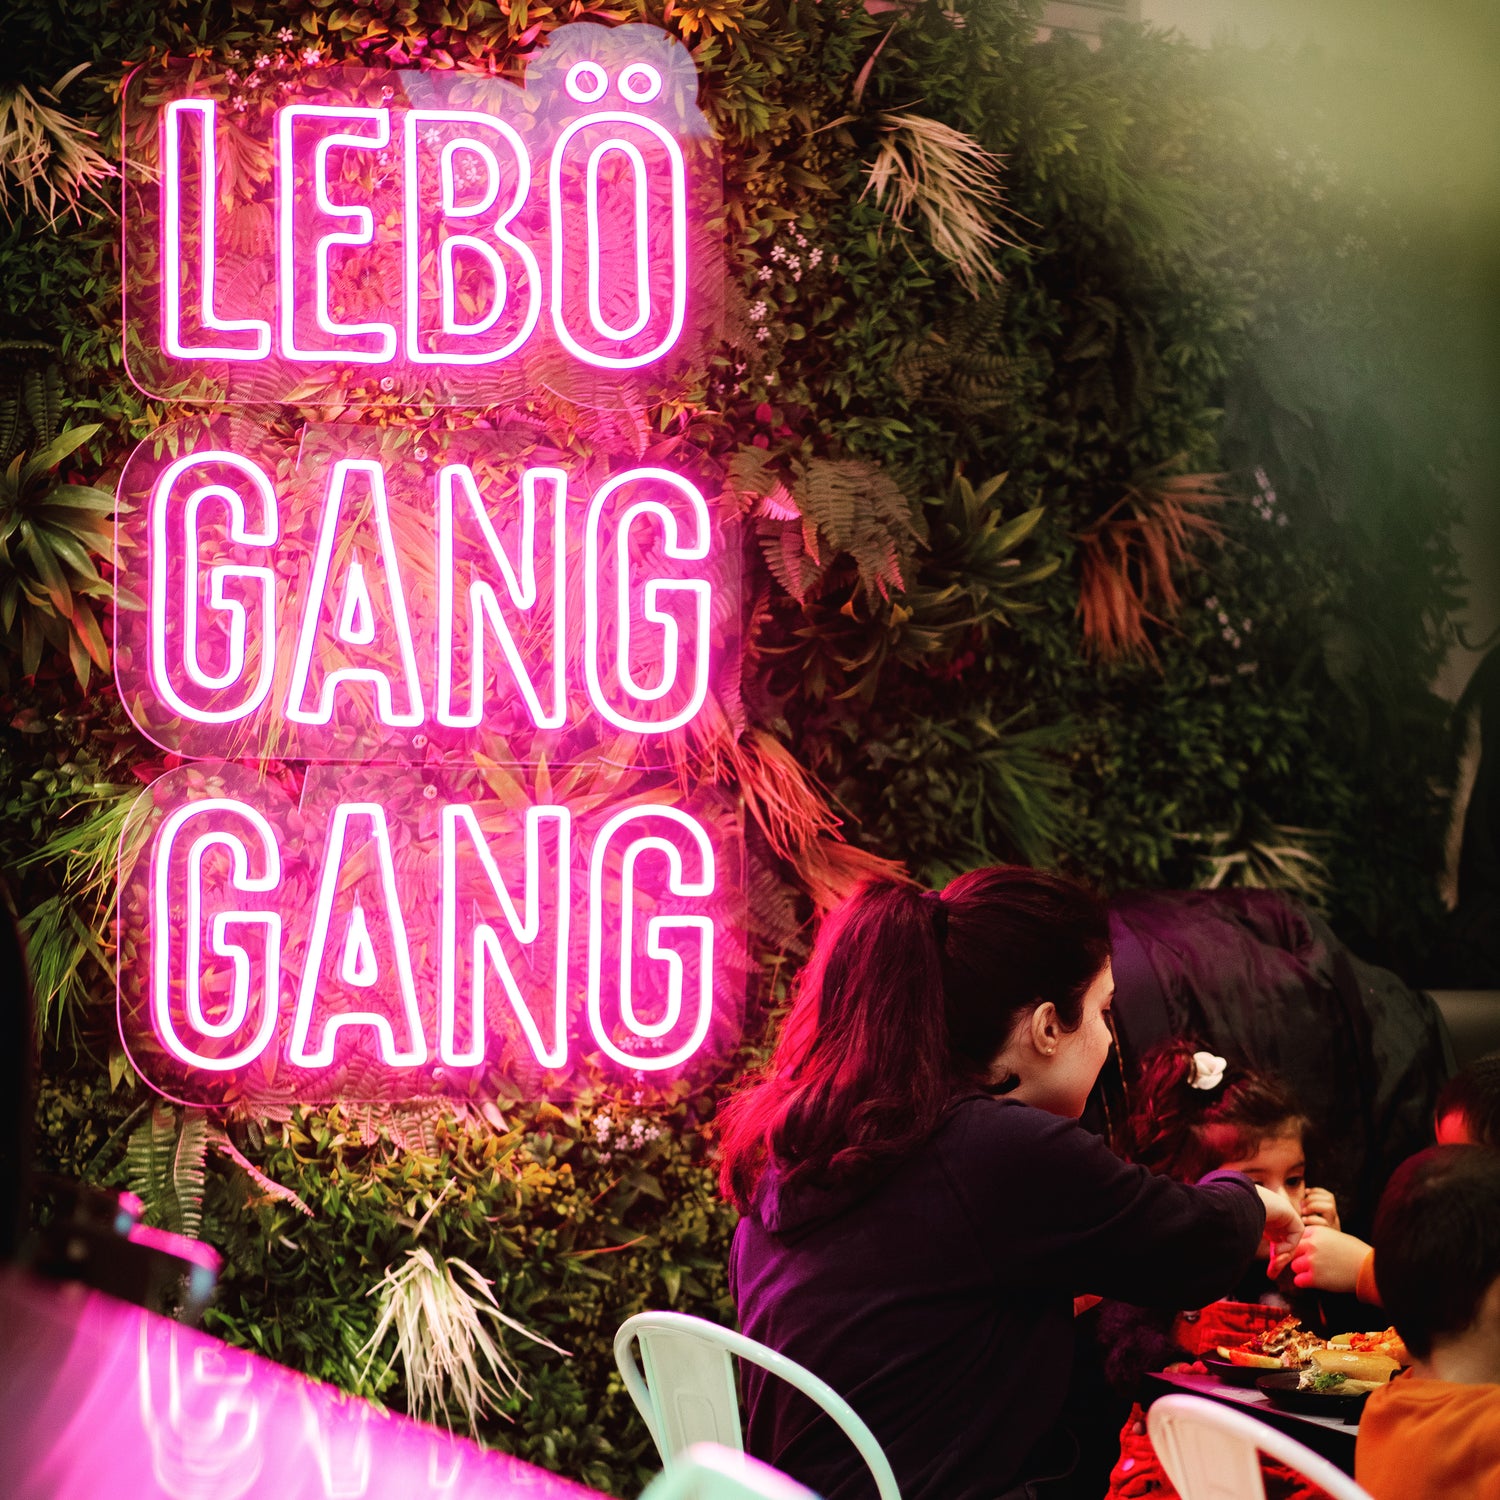 Photo of a Neon Light in the Restaurant saying LEBO GANG GANG